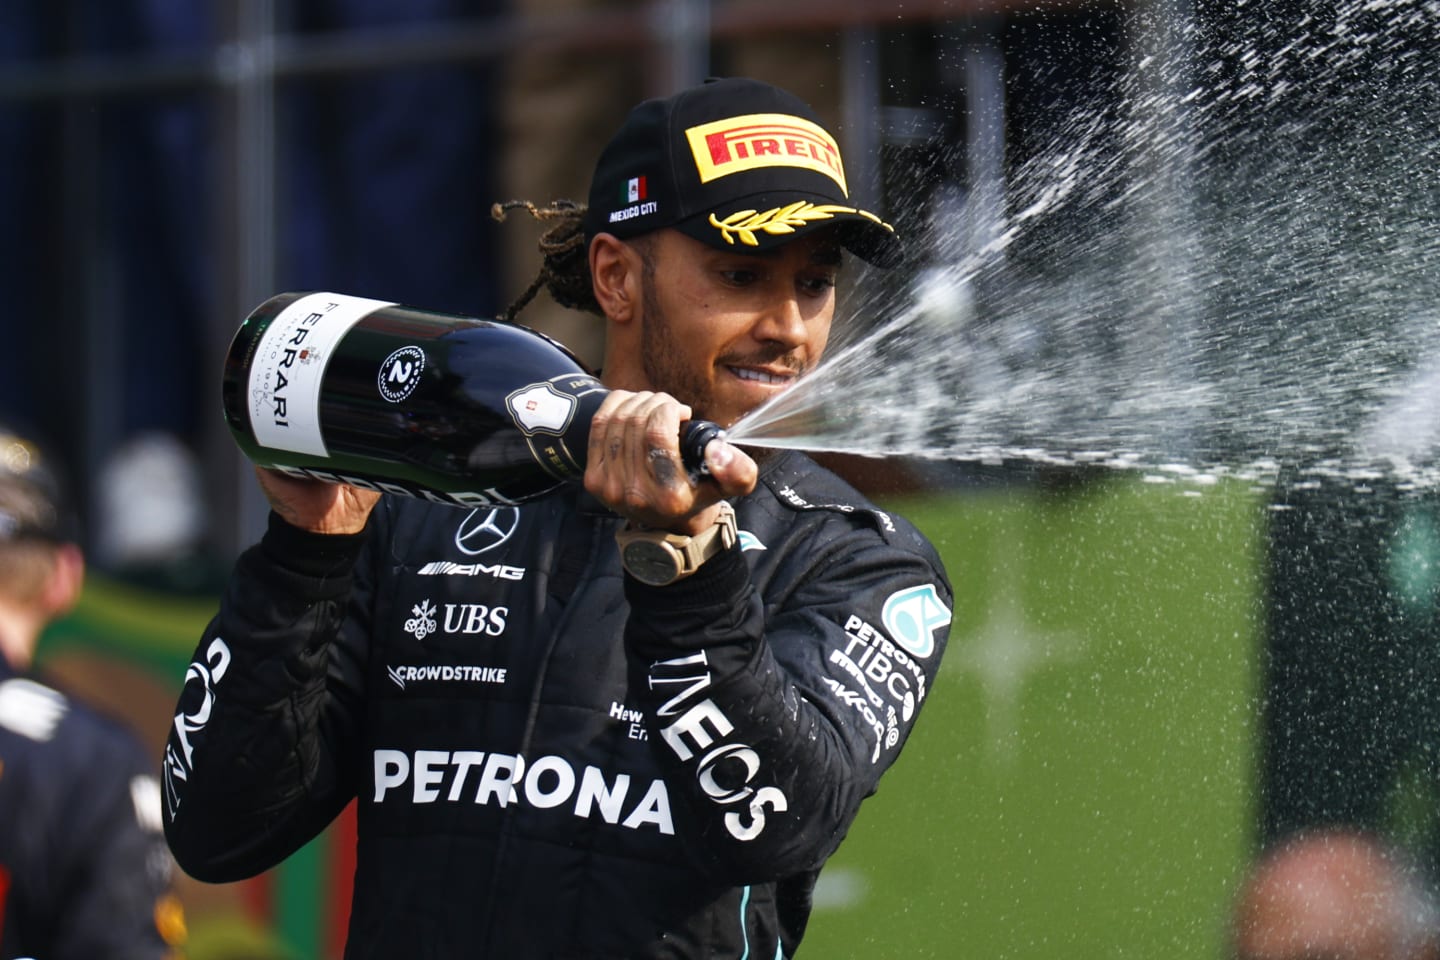 MEXICO CITY, MEXICO - OCTOBER 30: Second placed Lewis Hamilton of Great Britain and Mercedes celebrates on the podium during the F1 Grand Prix of Mexico at Autodromo Hermanos Rodriguez on October 30, 2022 in Mexico City, Mexico. (Photo by Chris Graythen/Getty Images)